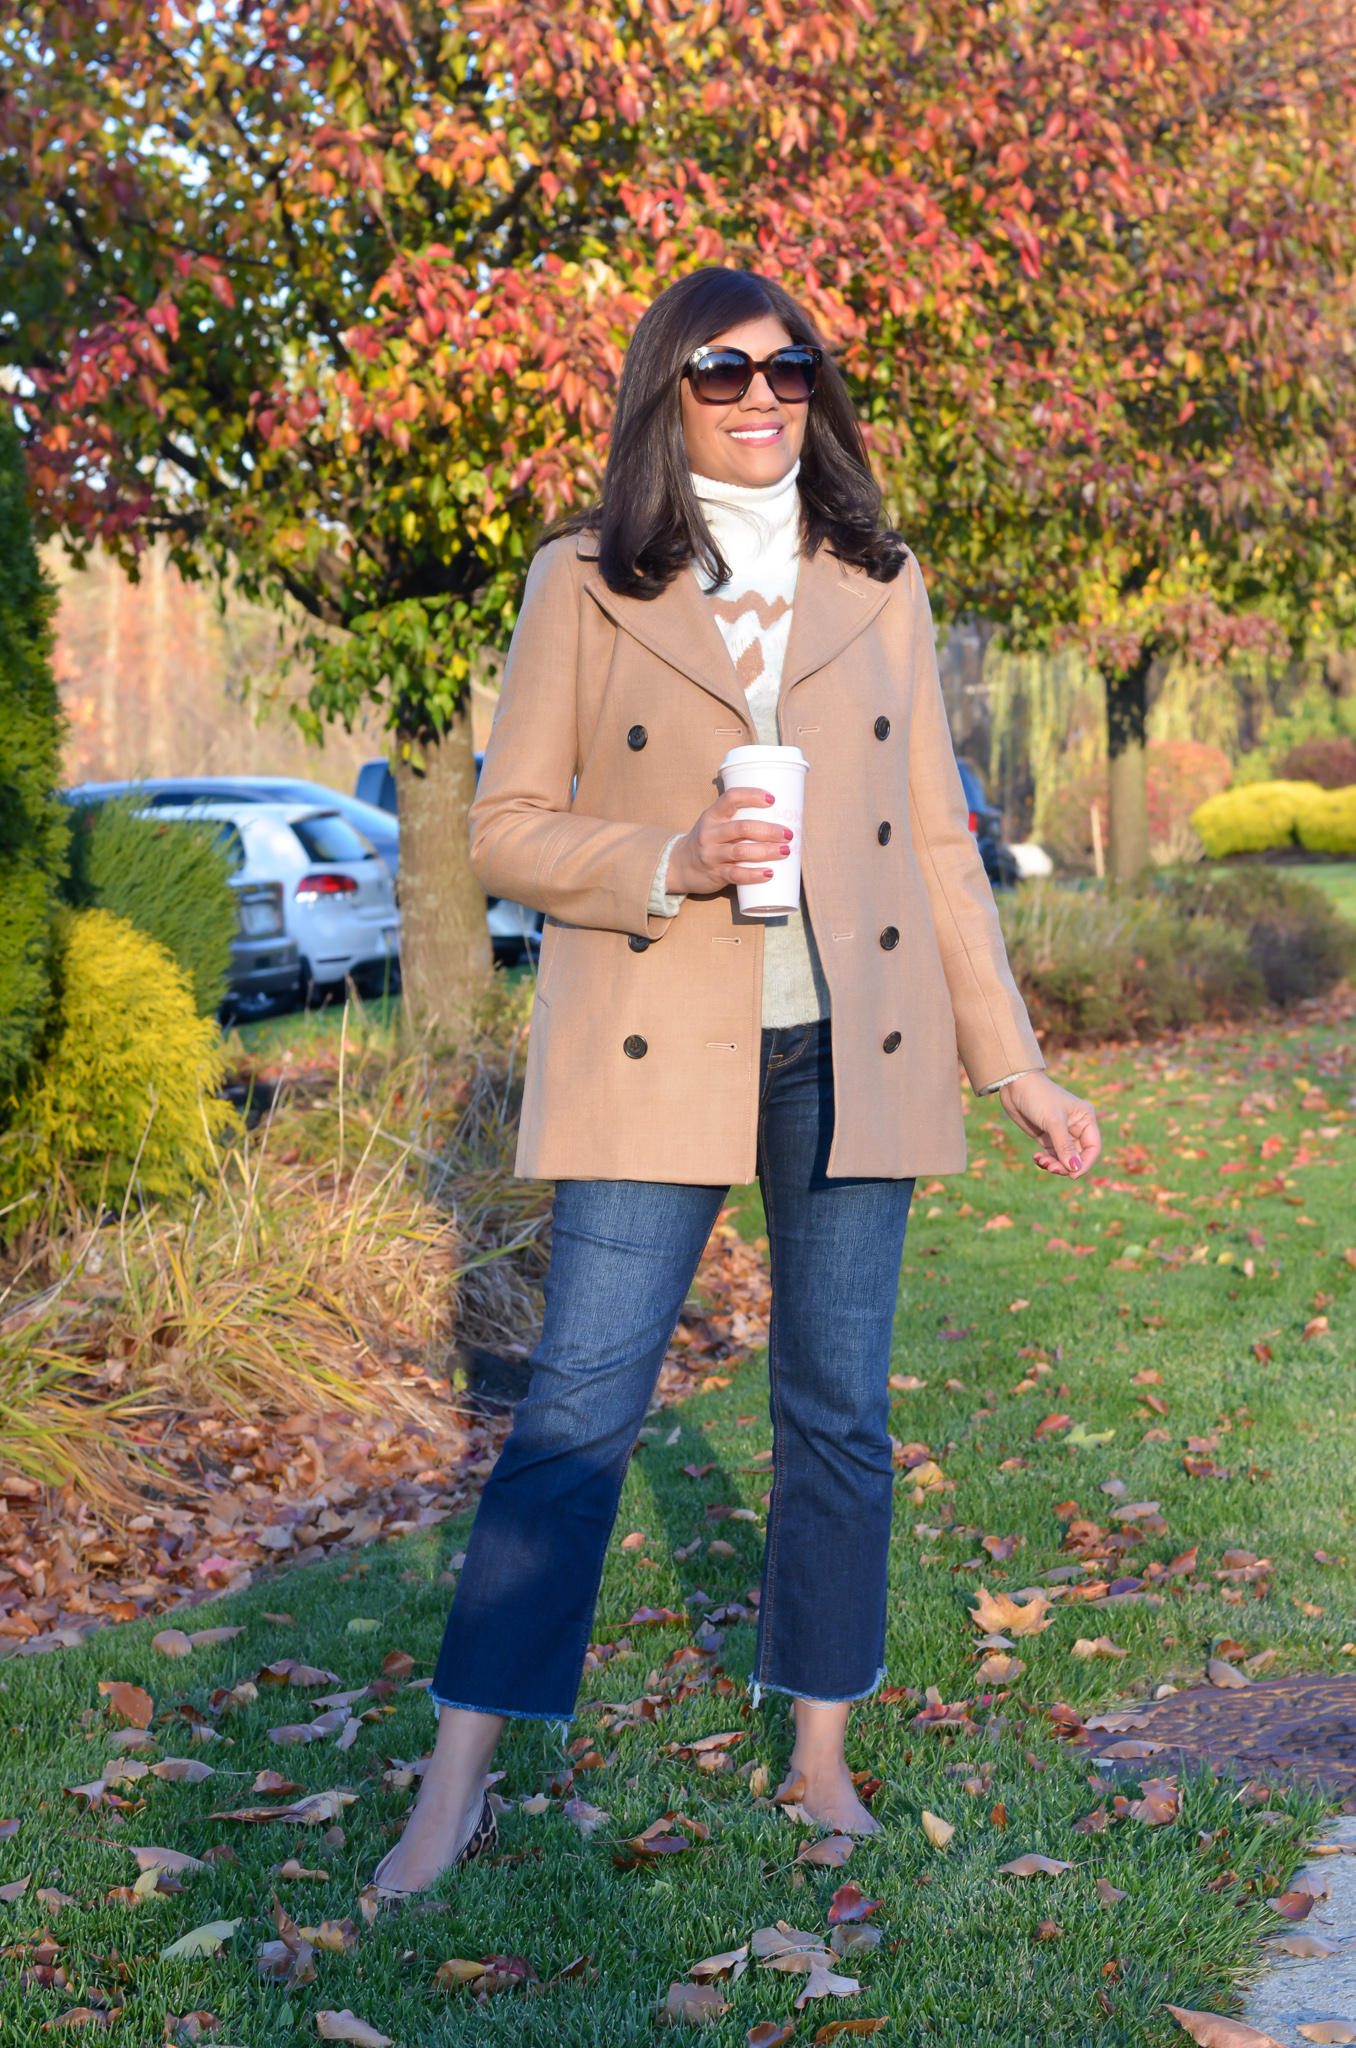 Desiree Leone of Beautifully Seaside features fall outfits to recreate this season